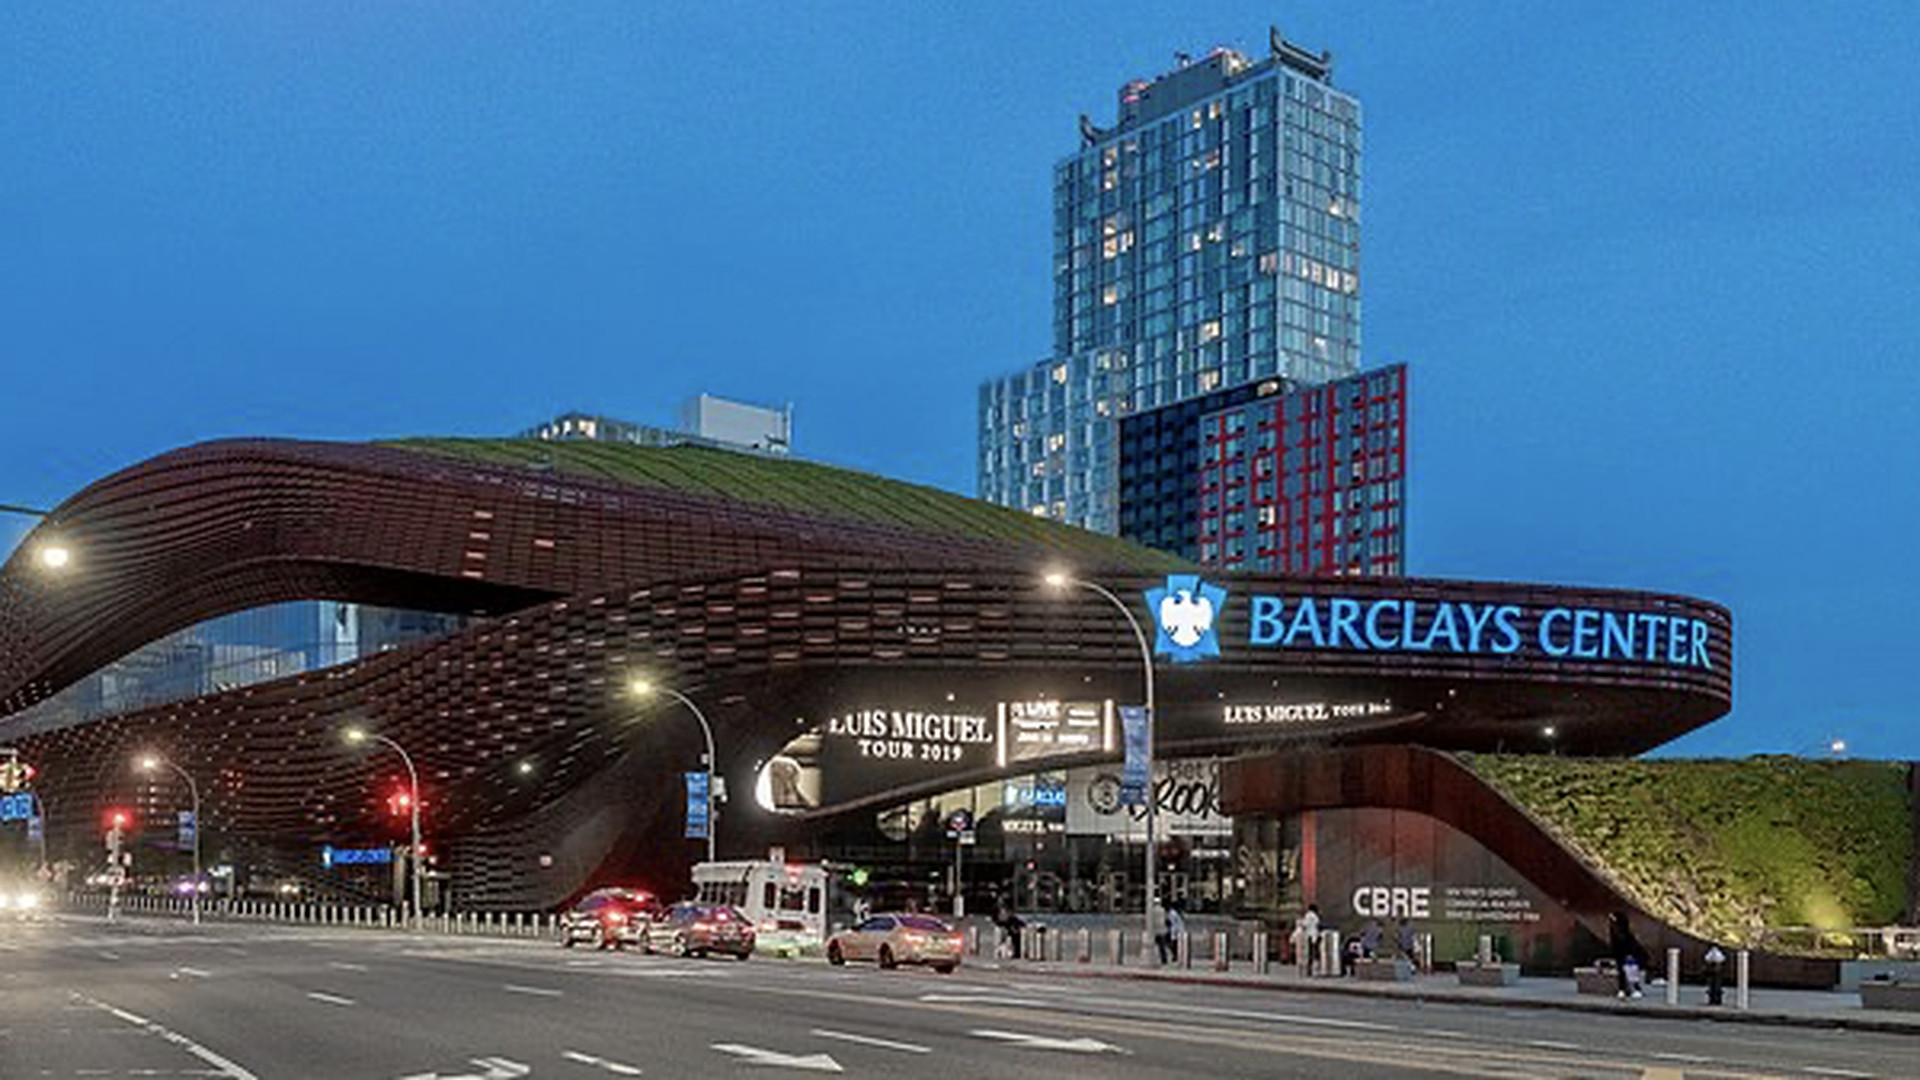 bse global announces renovations to barclays center, creation of two premium fan clubs